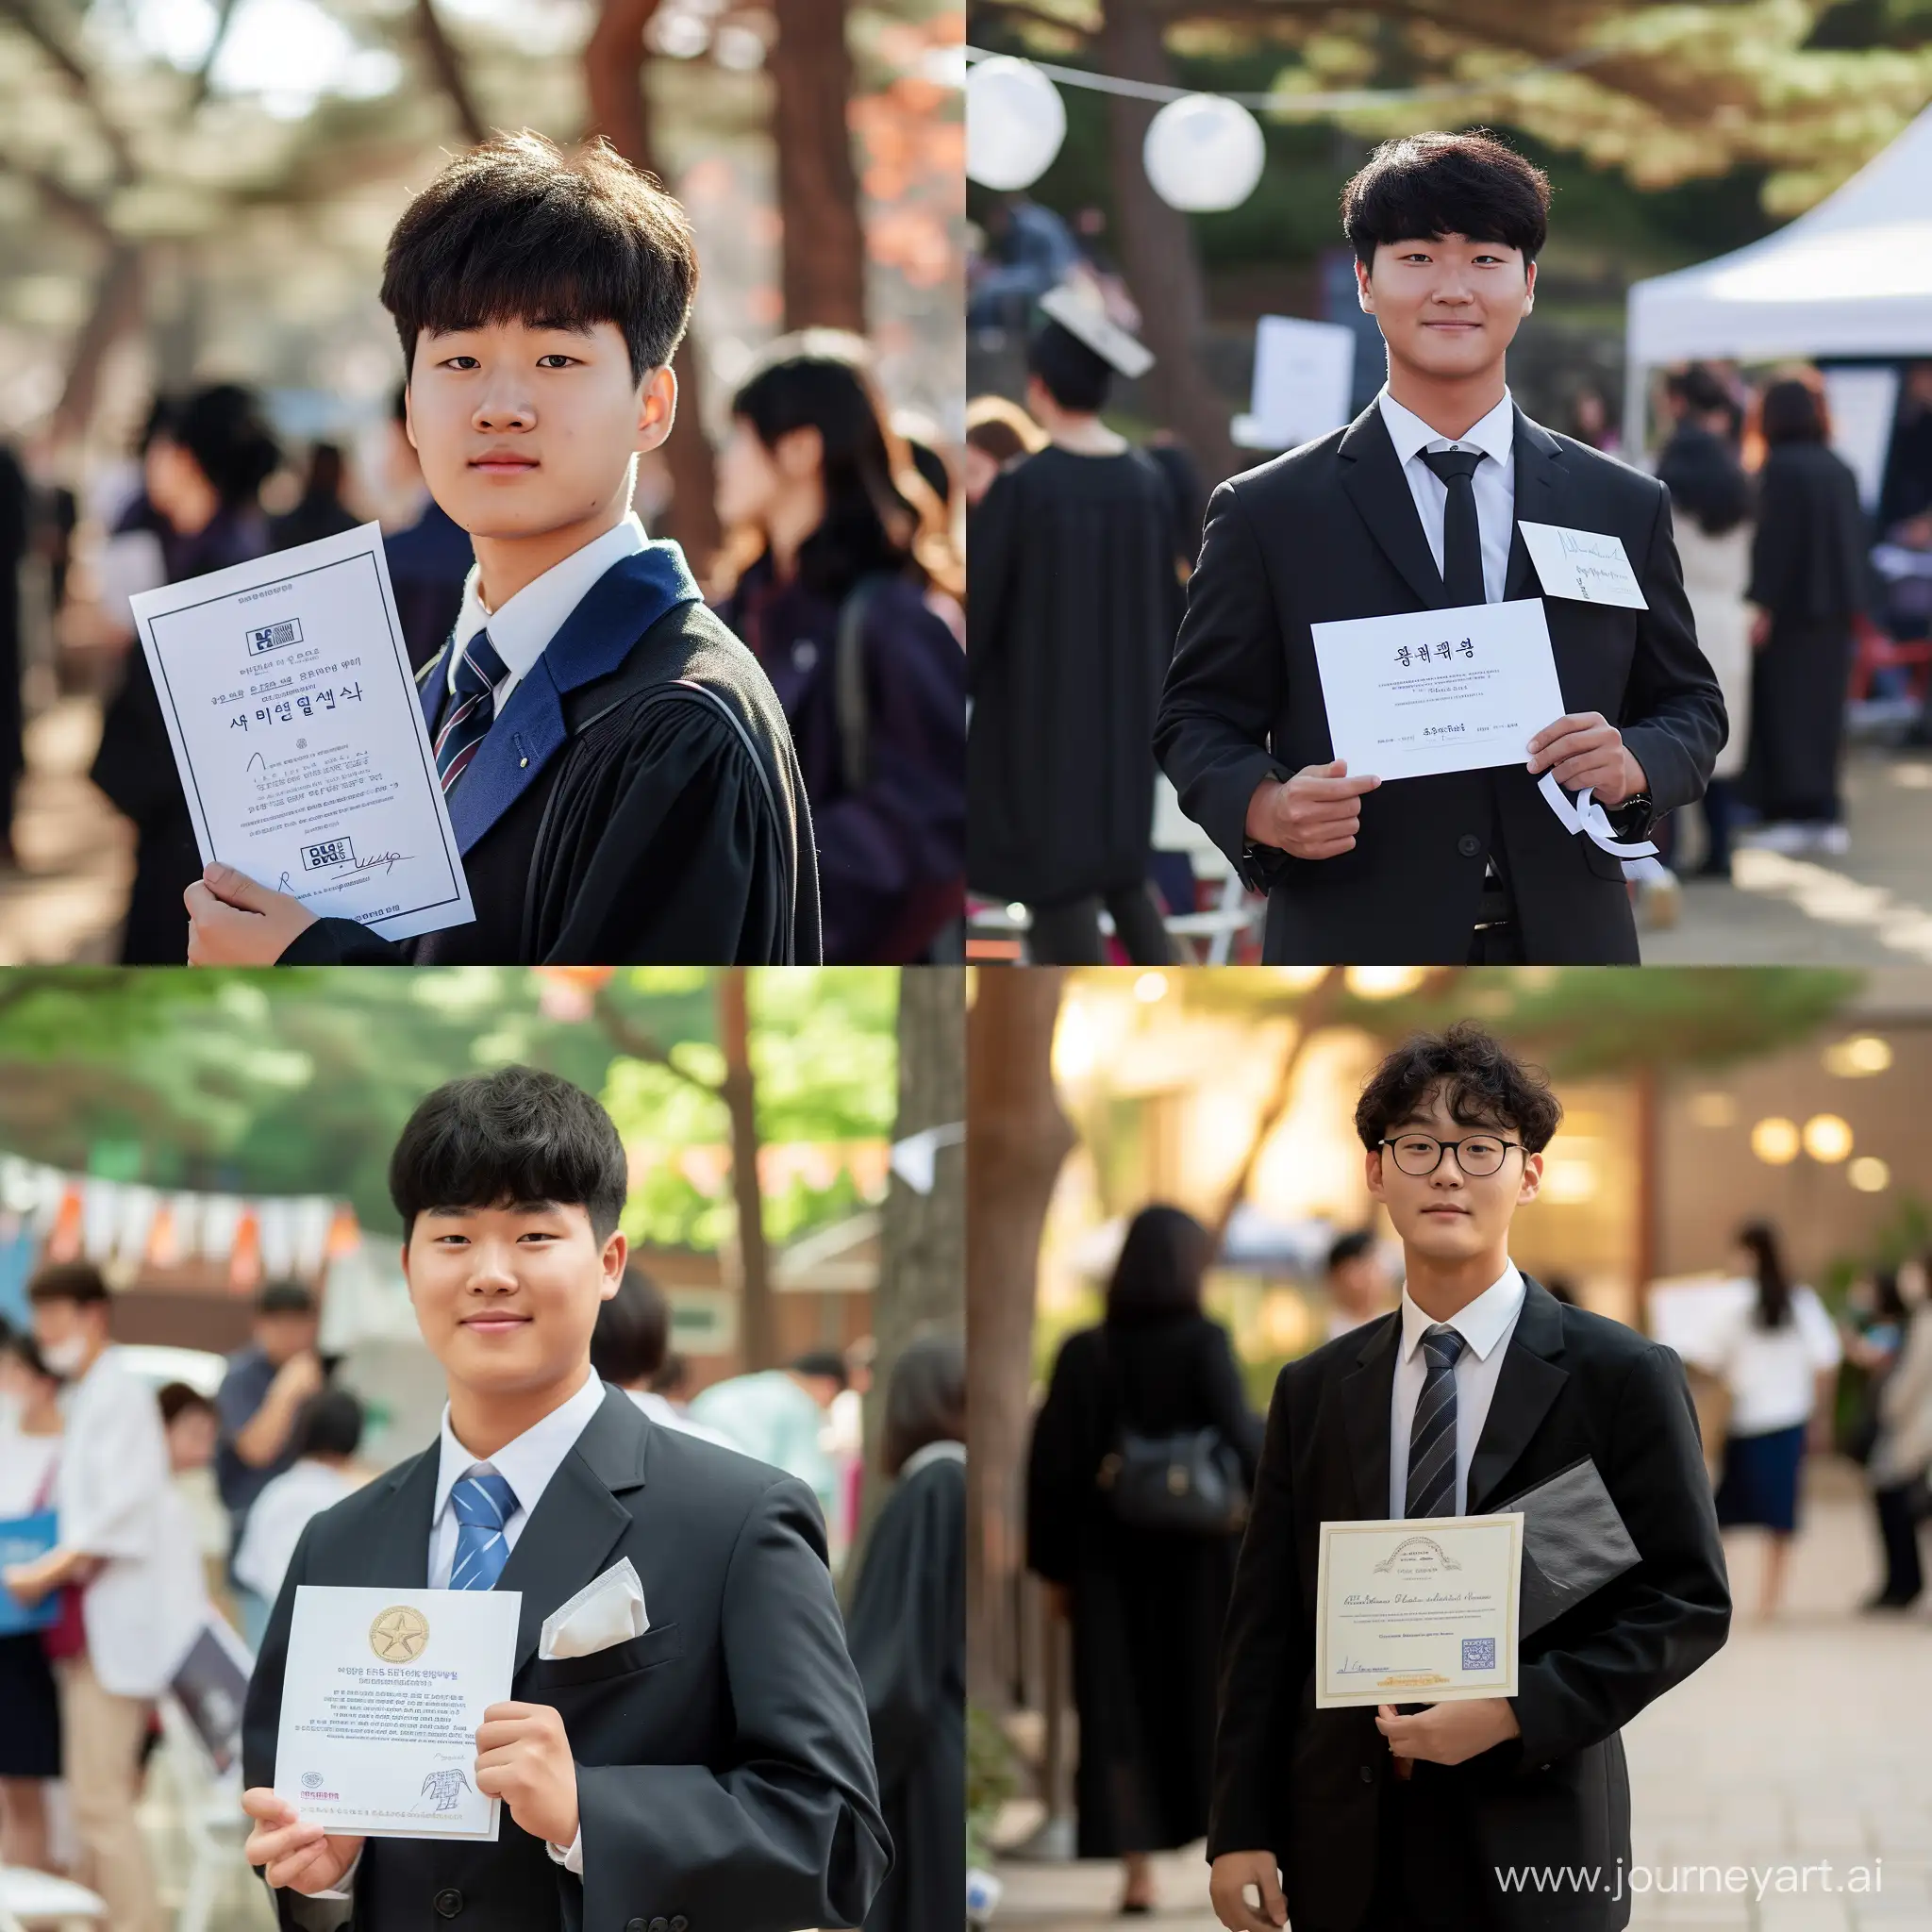 Graduation of a male Korean highschooler, standing with certificate in his hand